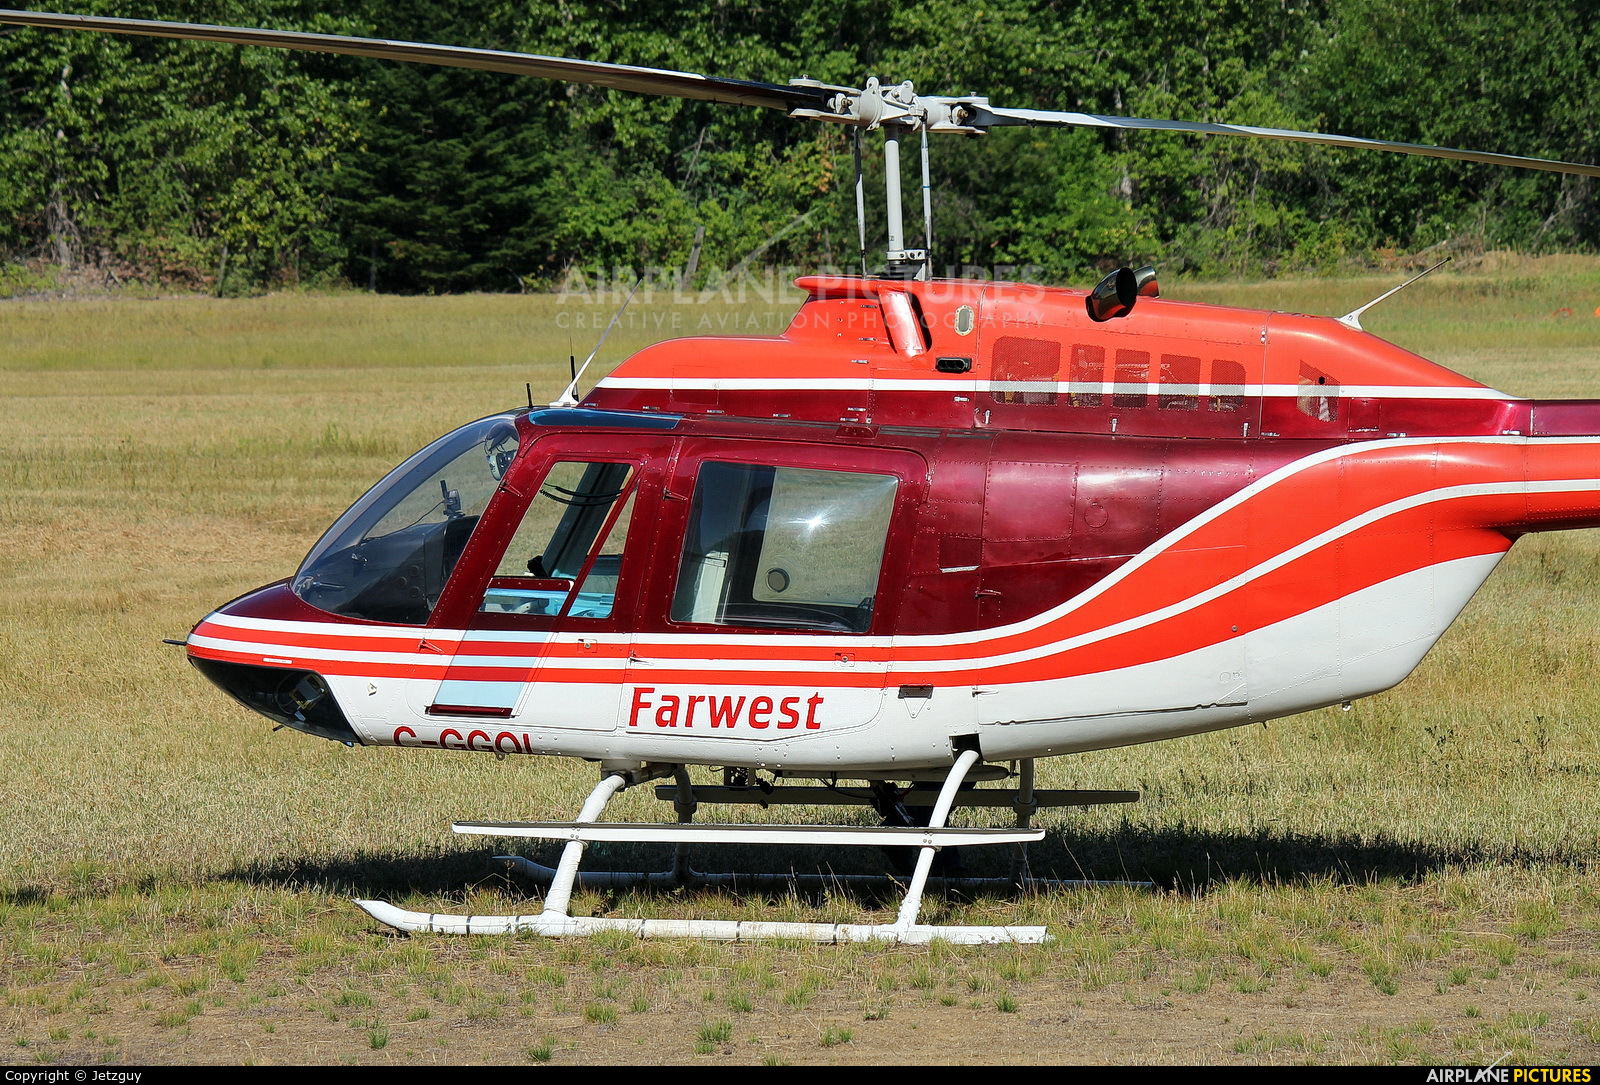 Farwest Helicopters C-GGQL aircraft at Off Airport - British Columbia